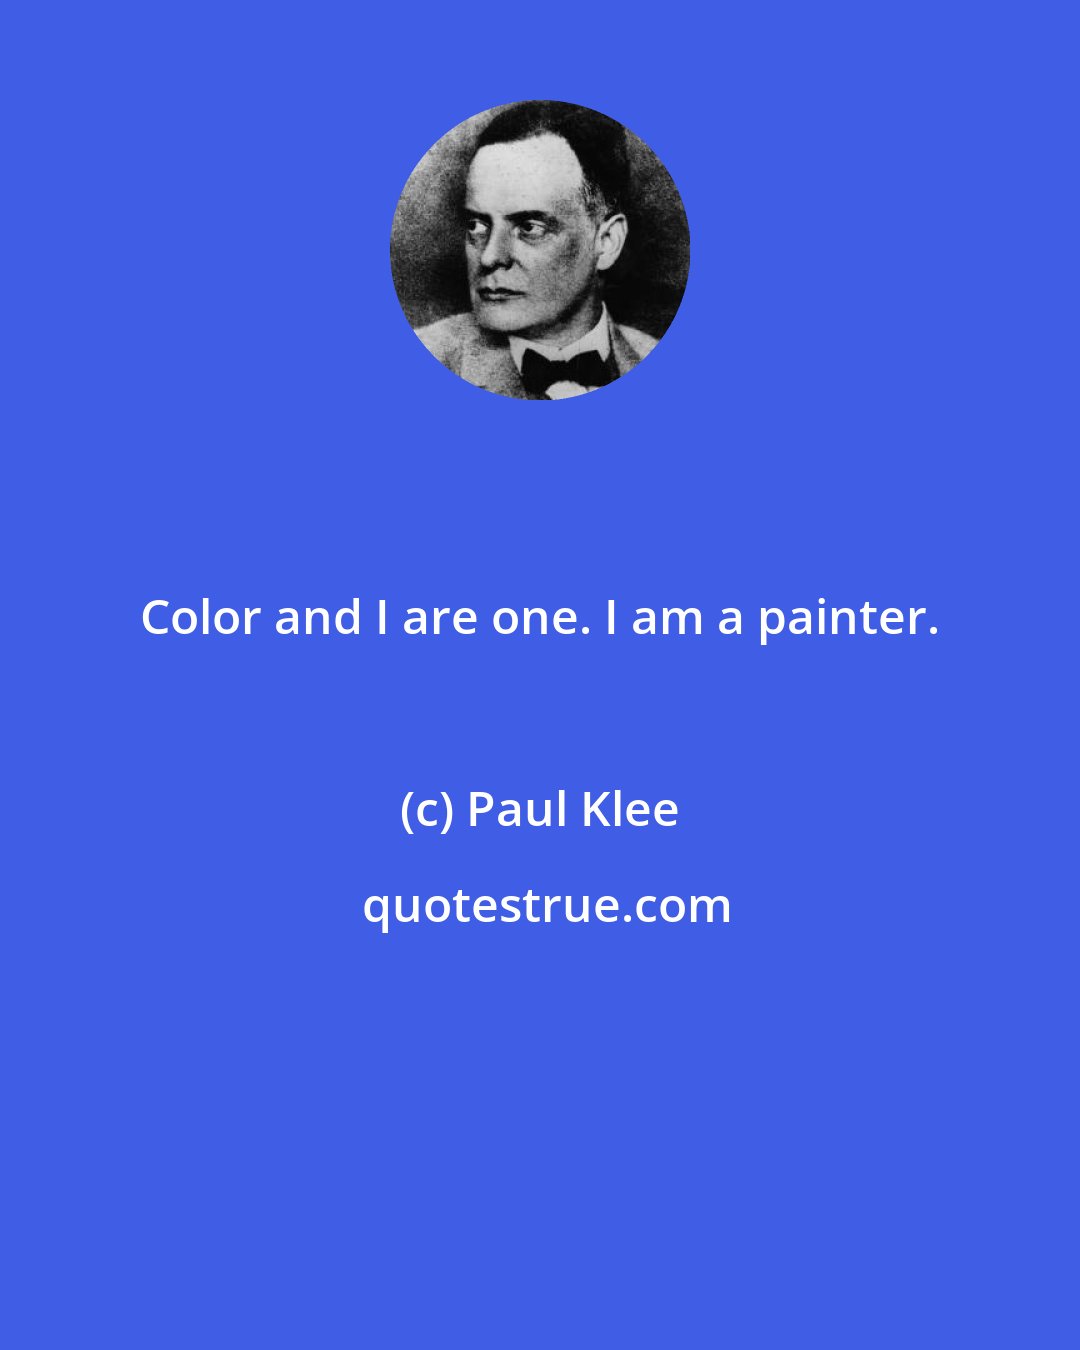 Paul Klee: Color and I are one. I am a painter.